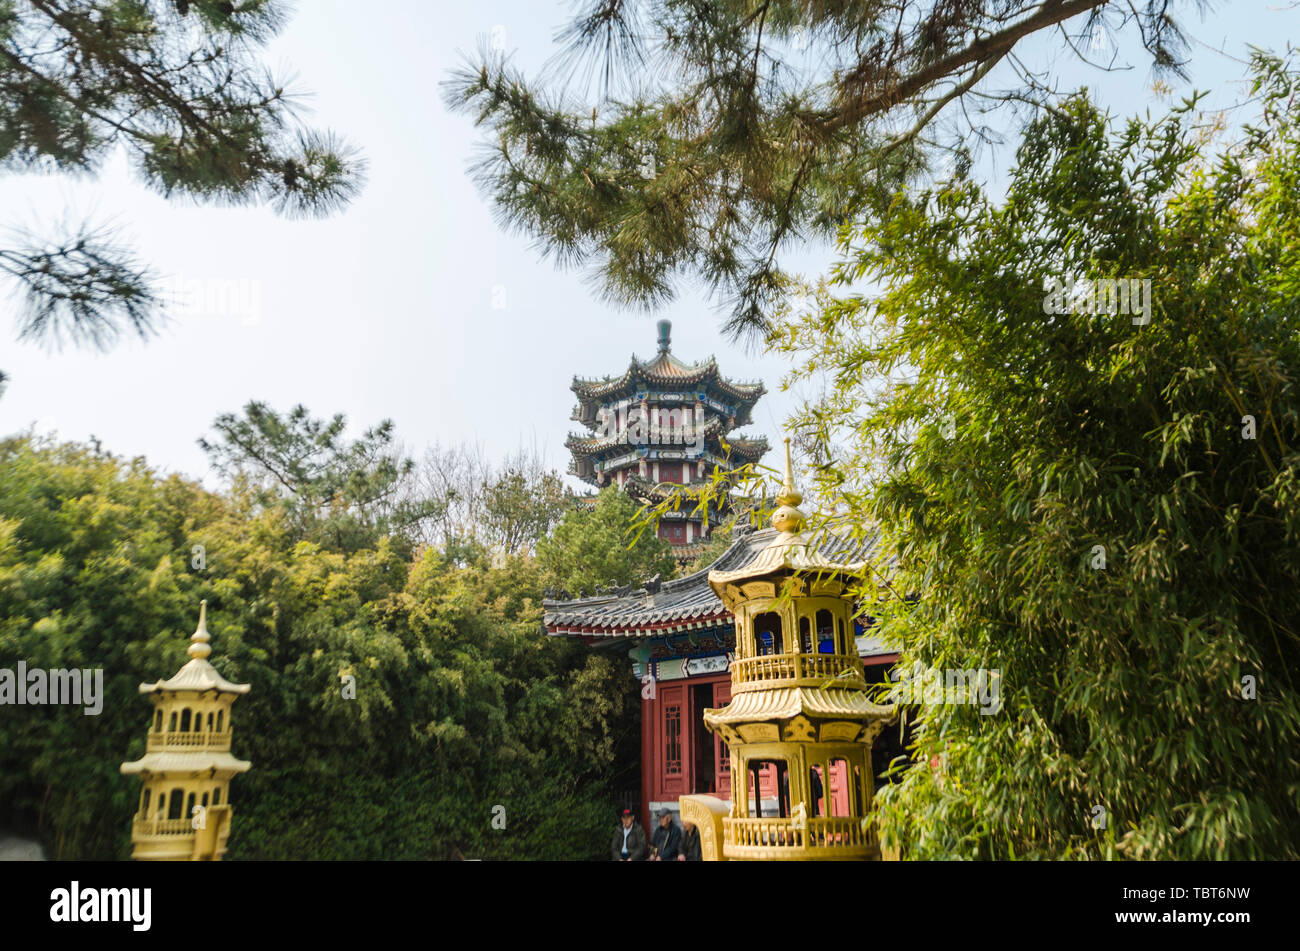 The golden gourd-topped incense stove in front of the Taoist door of Li Cun Park in Qingdao echoes the temple pagoda in the distance. Stock Photo